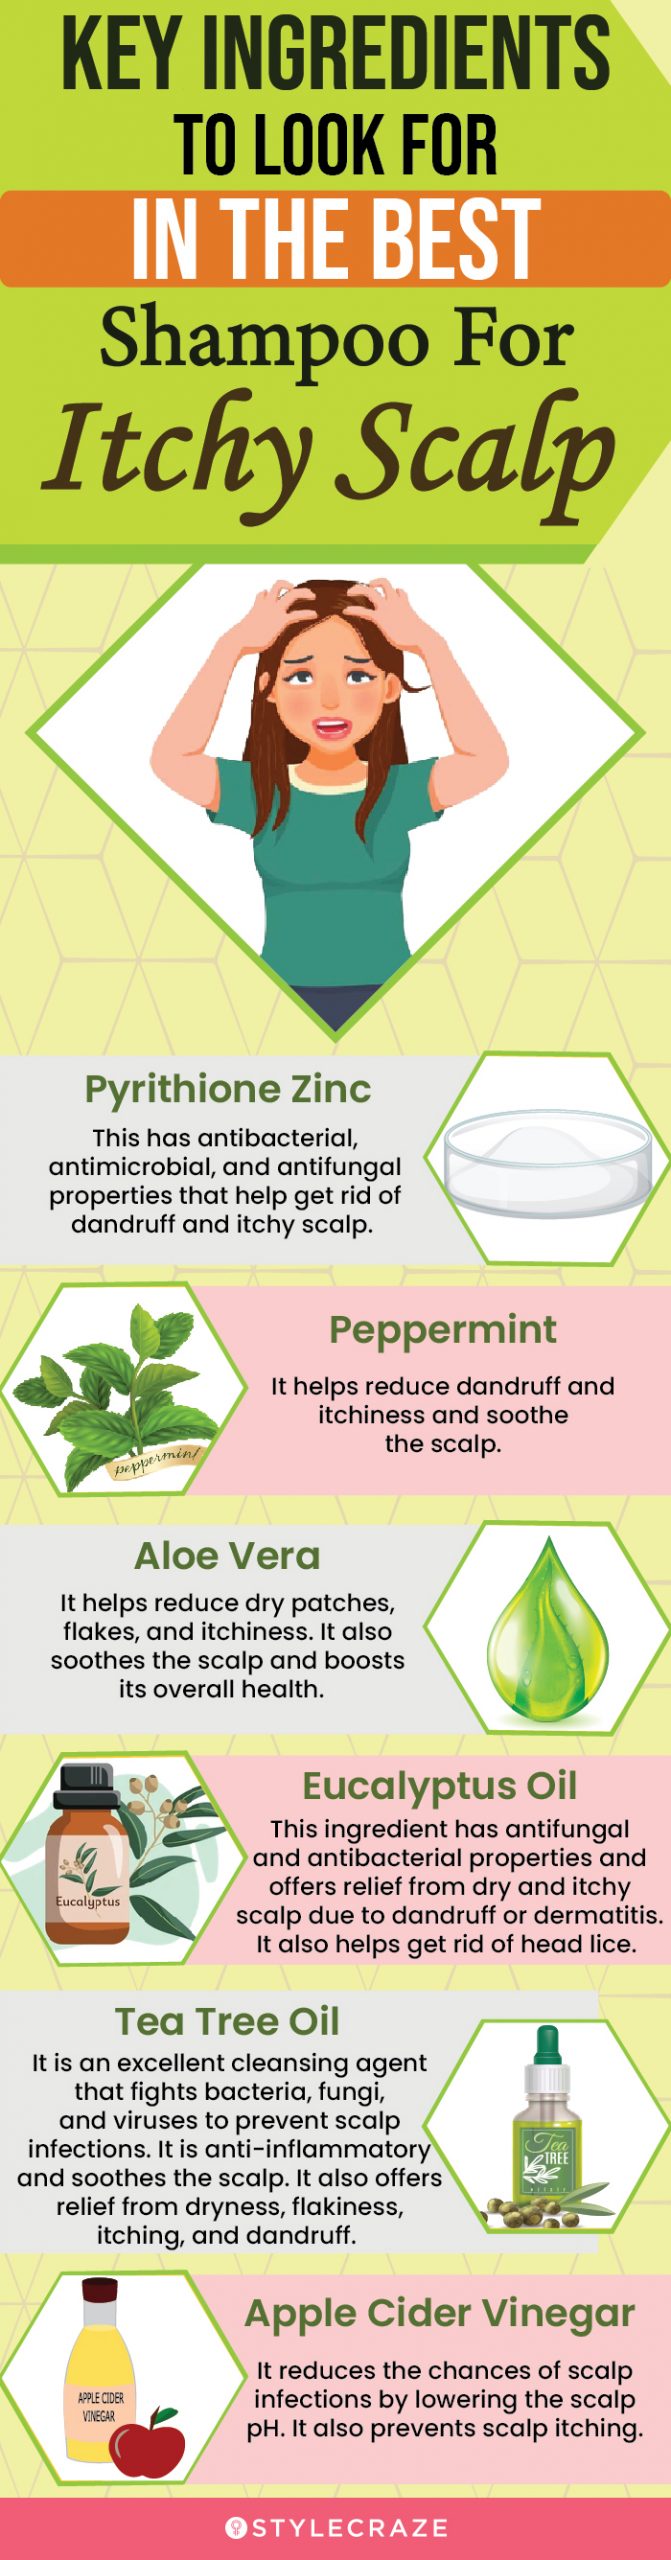 Key Ingredients To Look For In The Best Shampoo For Itchy Scalp (infographic)